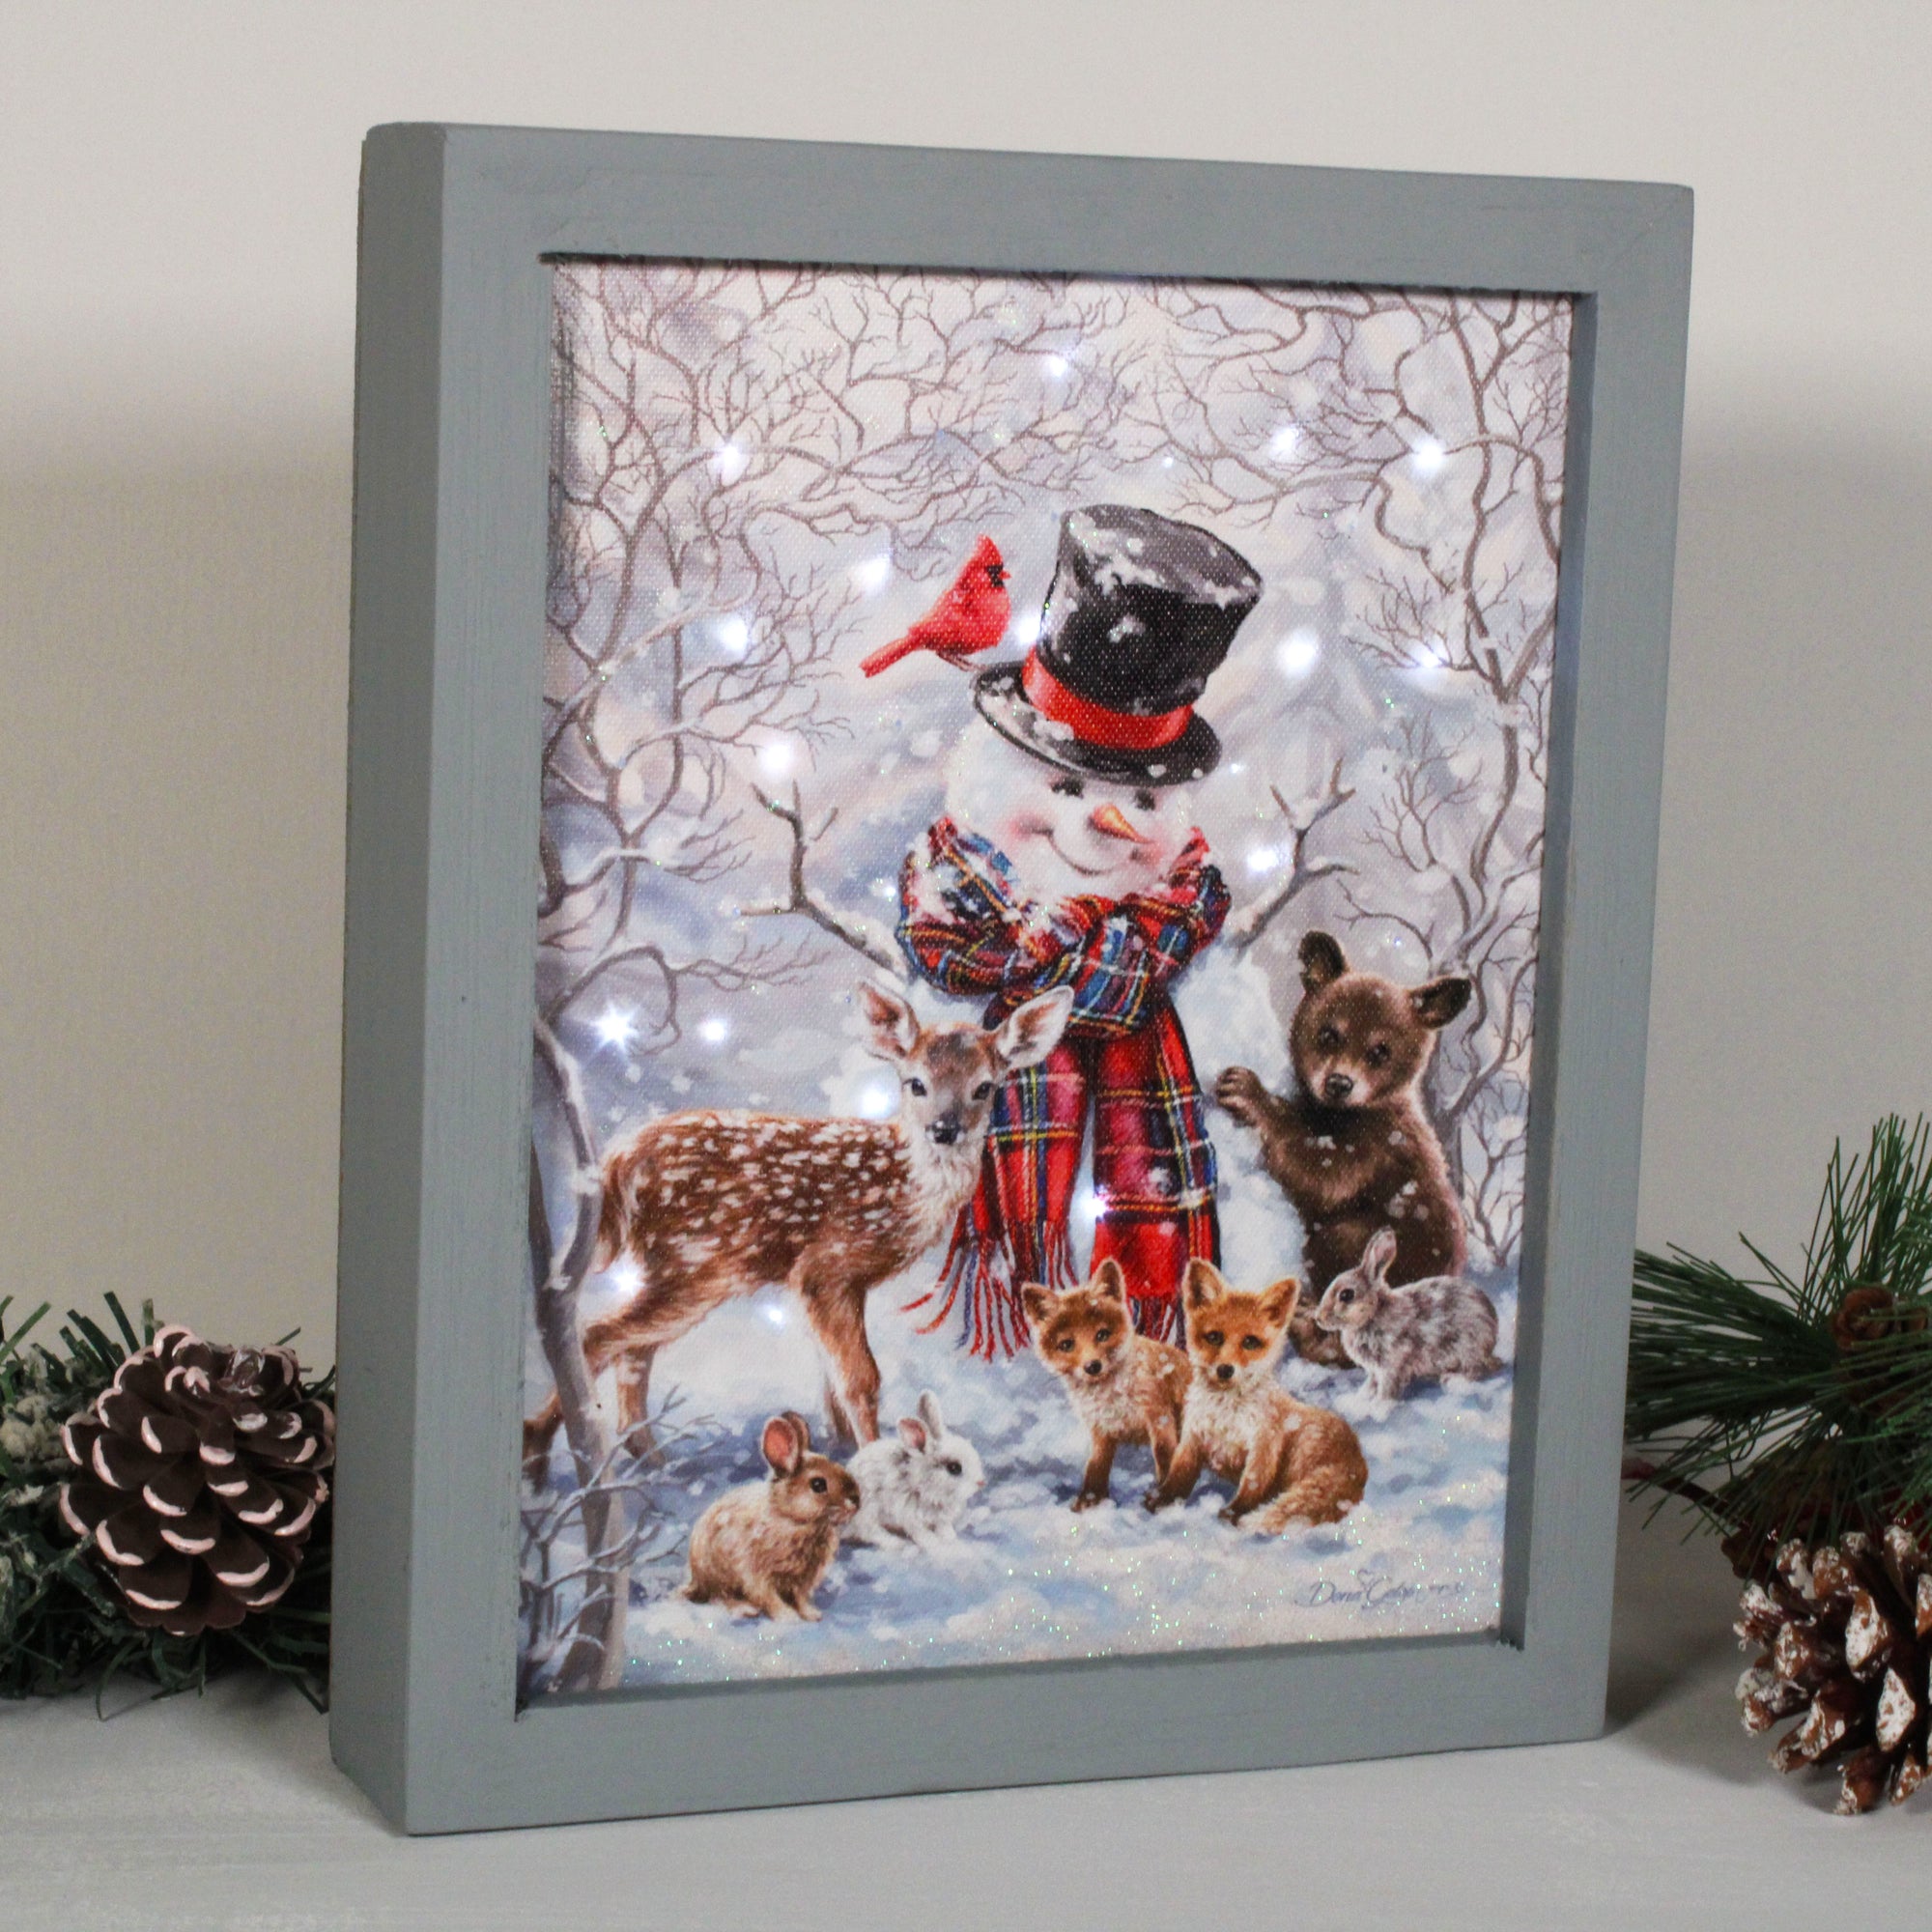 This enchanting piece captures the magic of the season with its stunning snow-covered forest scene and charming cast of characters.  Greeted by a jolly snowman donning a top hat and plaid scarf, you'll be delighted by the company of sweet forest friends. Adorable bunnies, baby foxes, a precious fawn, and even a playful baby bear complete the scene.